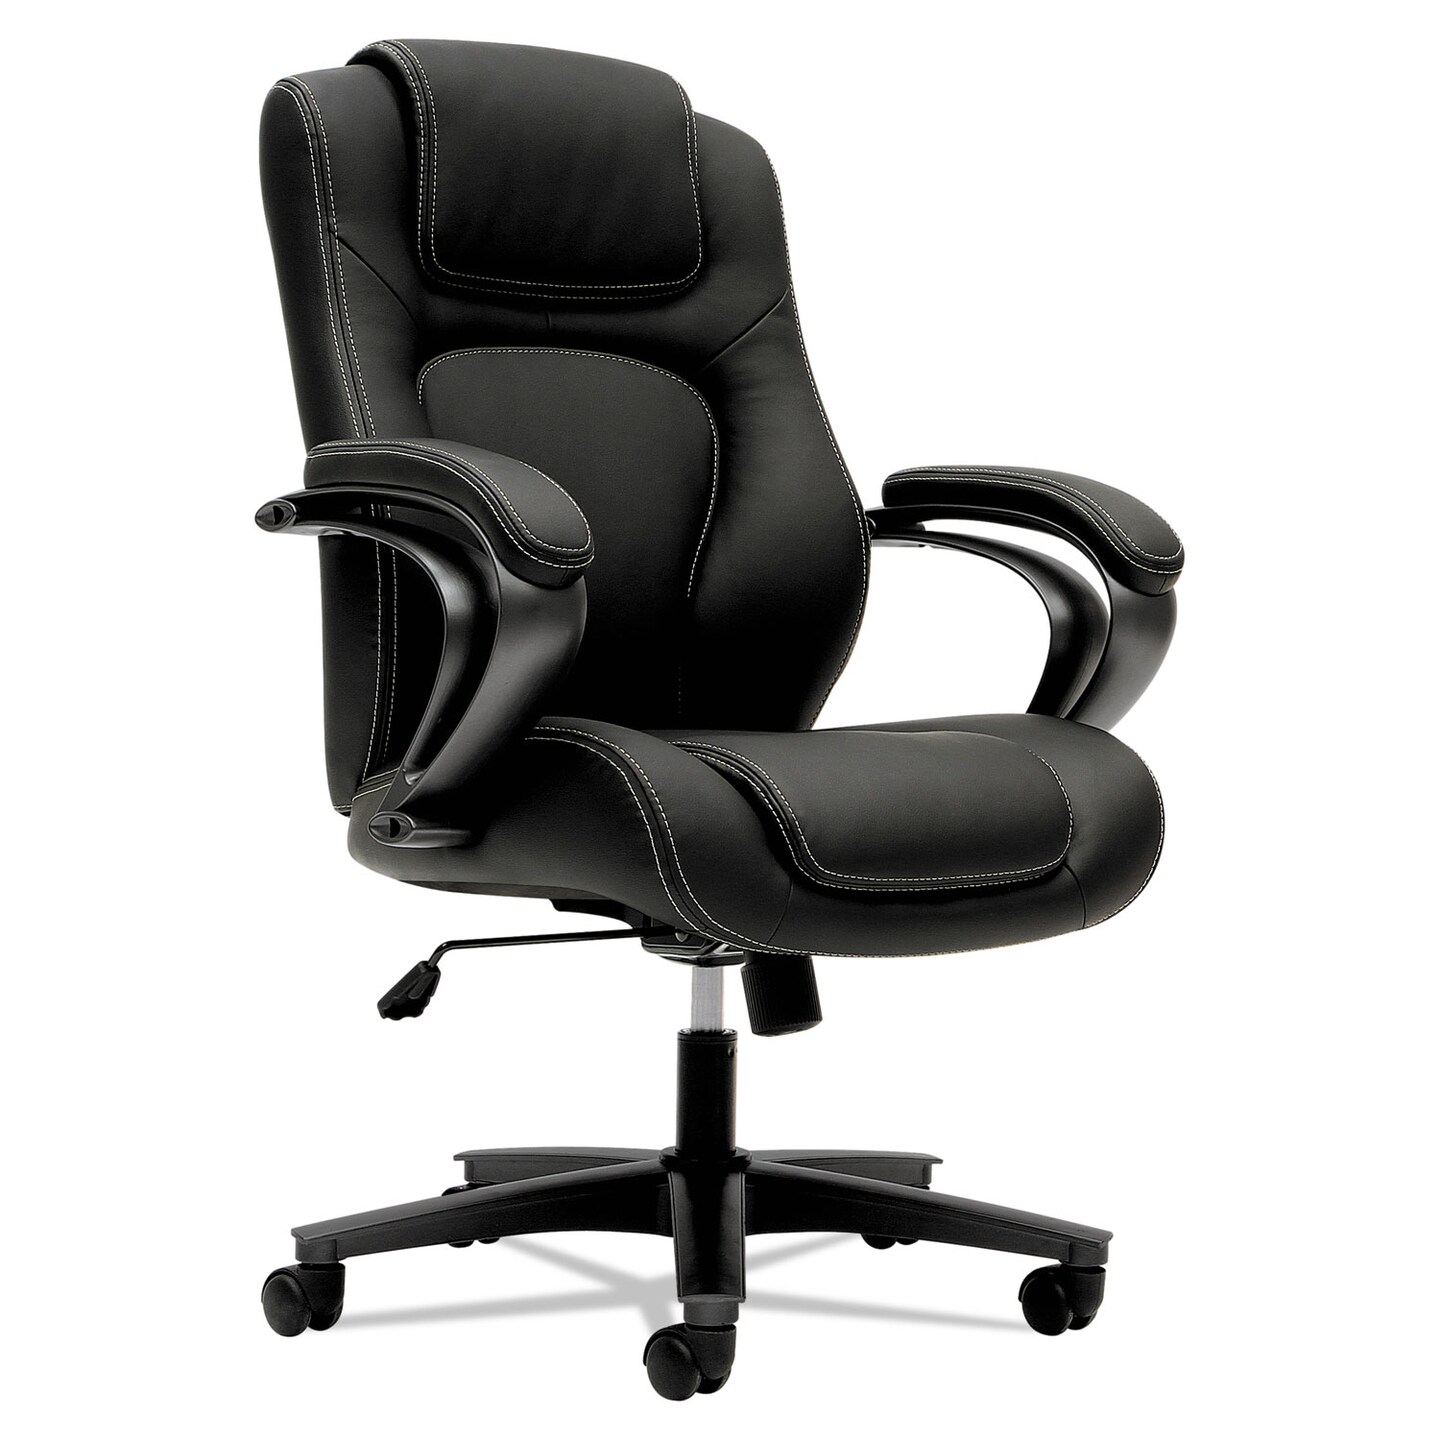 Basyx by Hon HVL402 Series Executive High-Back Chair, Supports up to 250 lbs., Black Seat/Black Back, Black Base